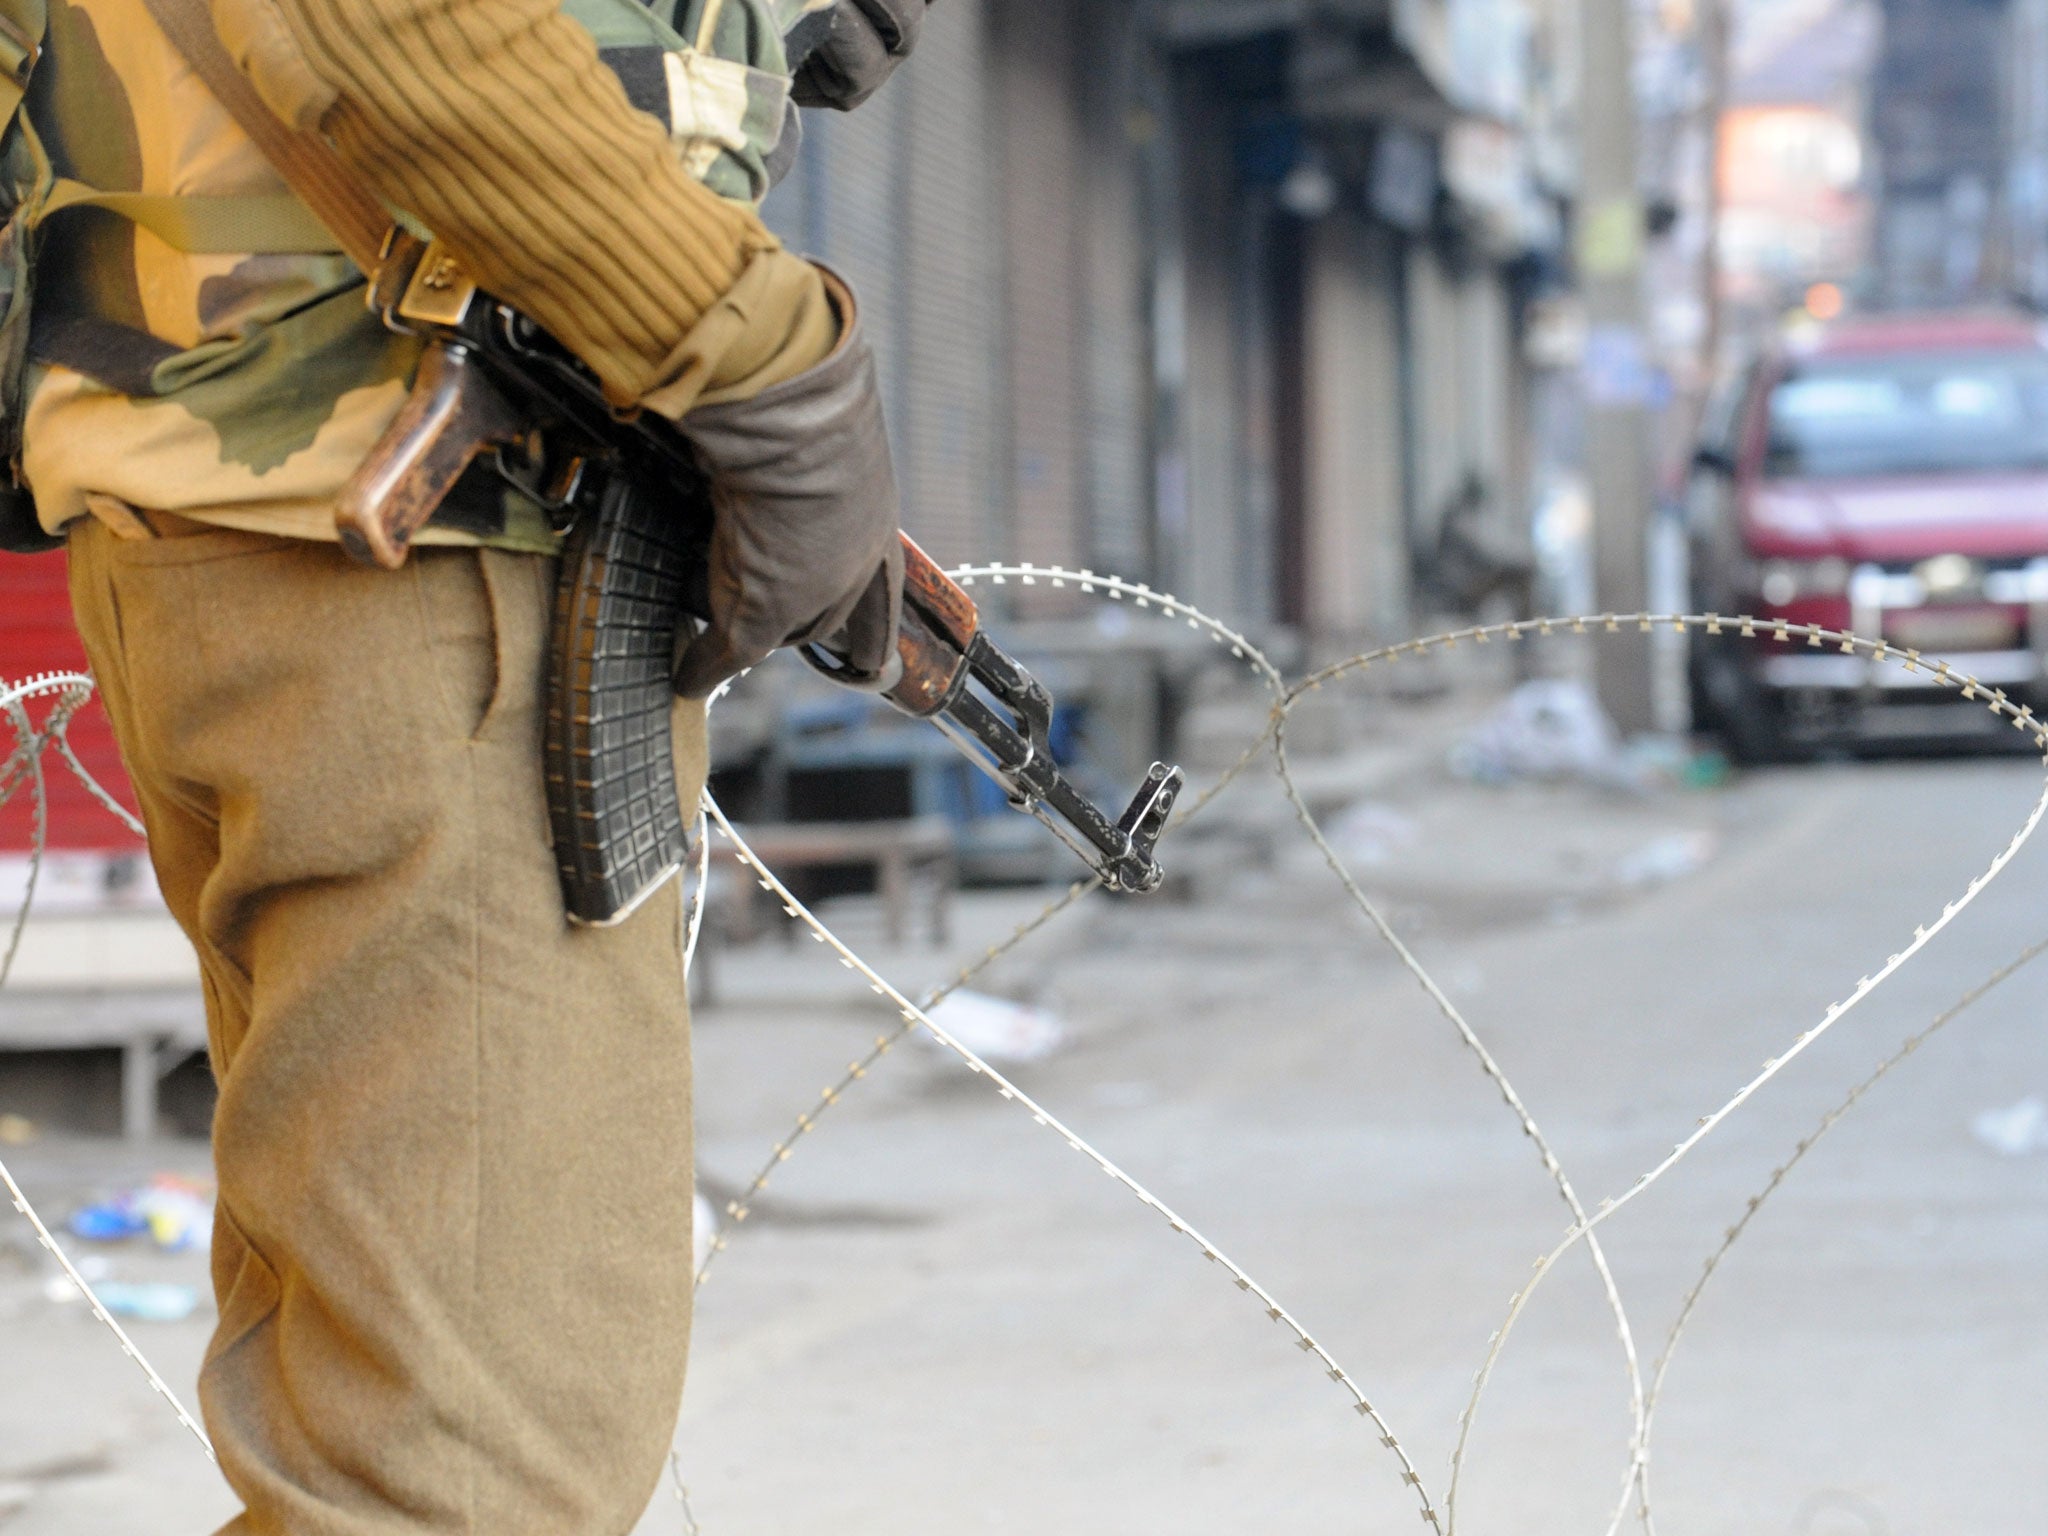 A curfew was imposed in most parts of Jammu and Kashmir state